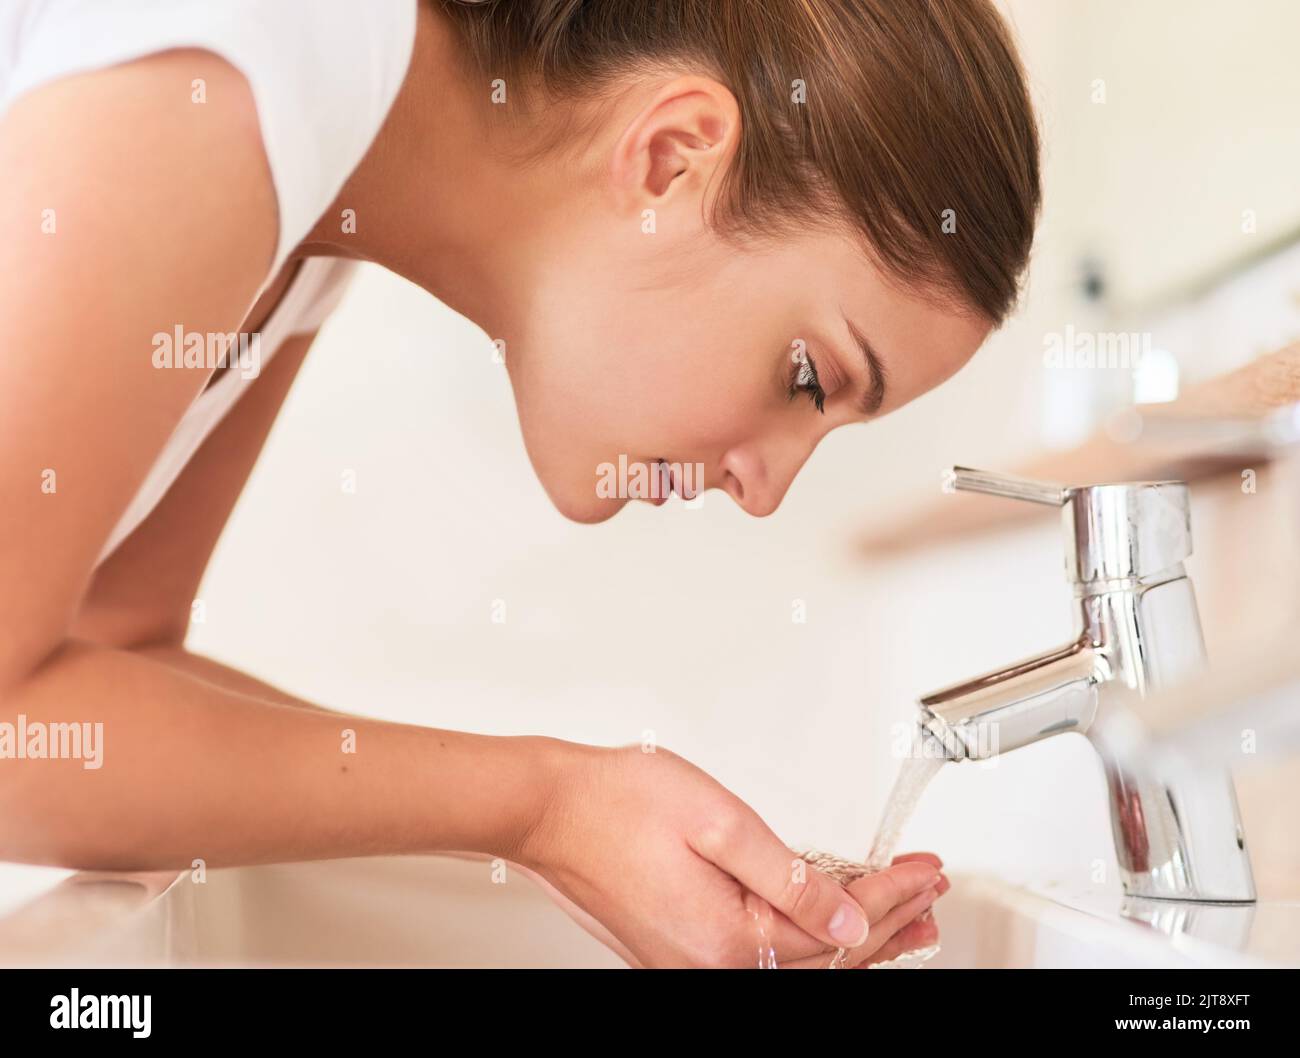 Cleanliness is key. a young woman washing her face in the bathroom. Stock Photo